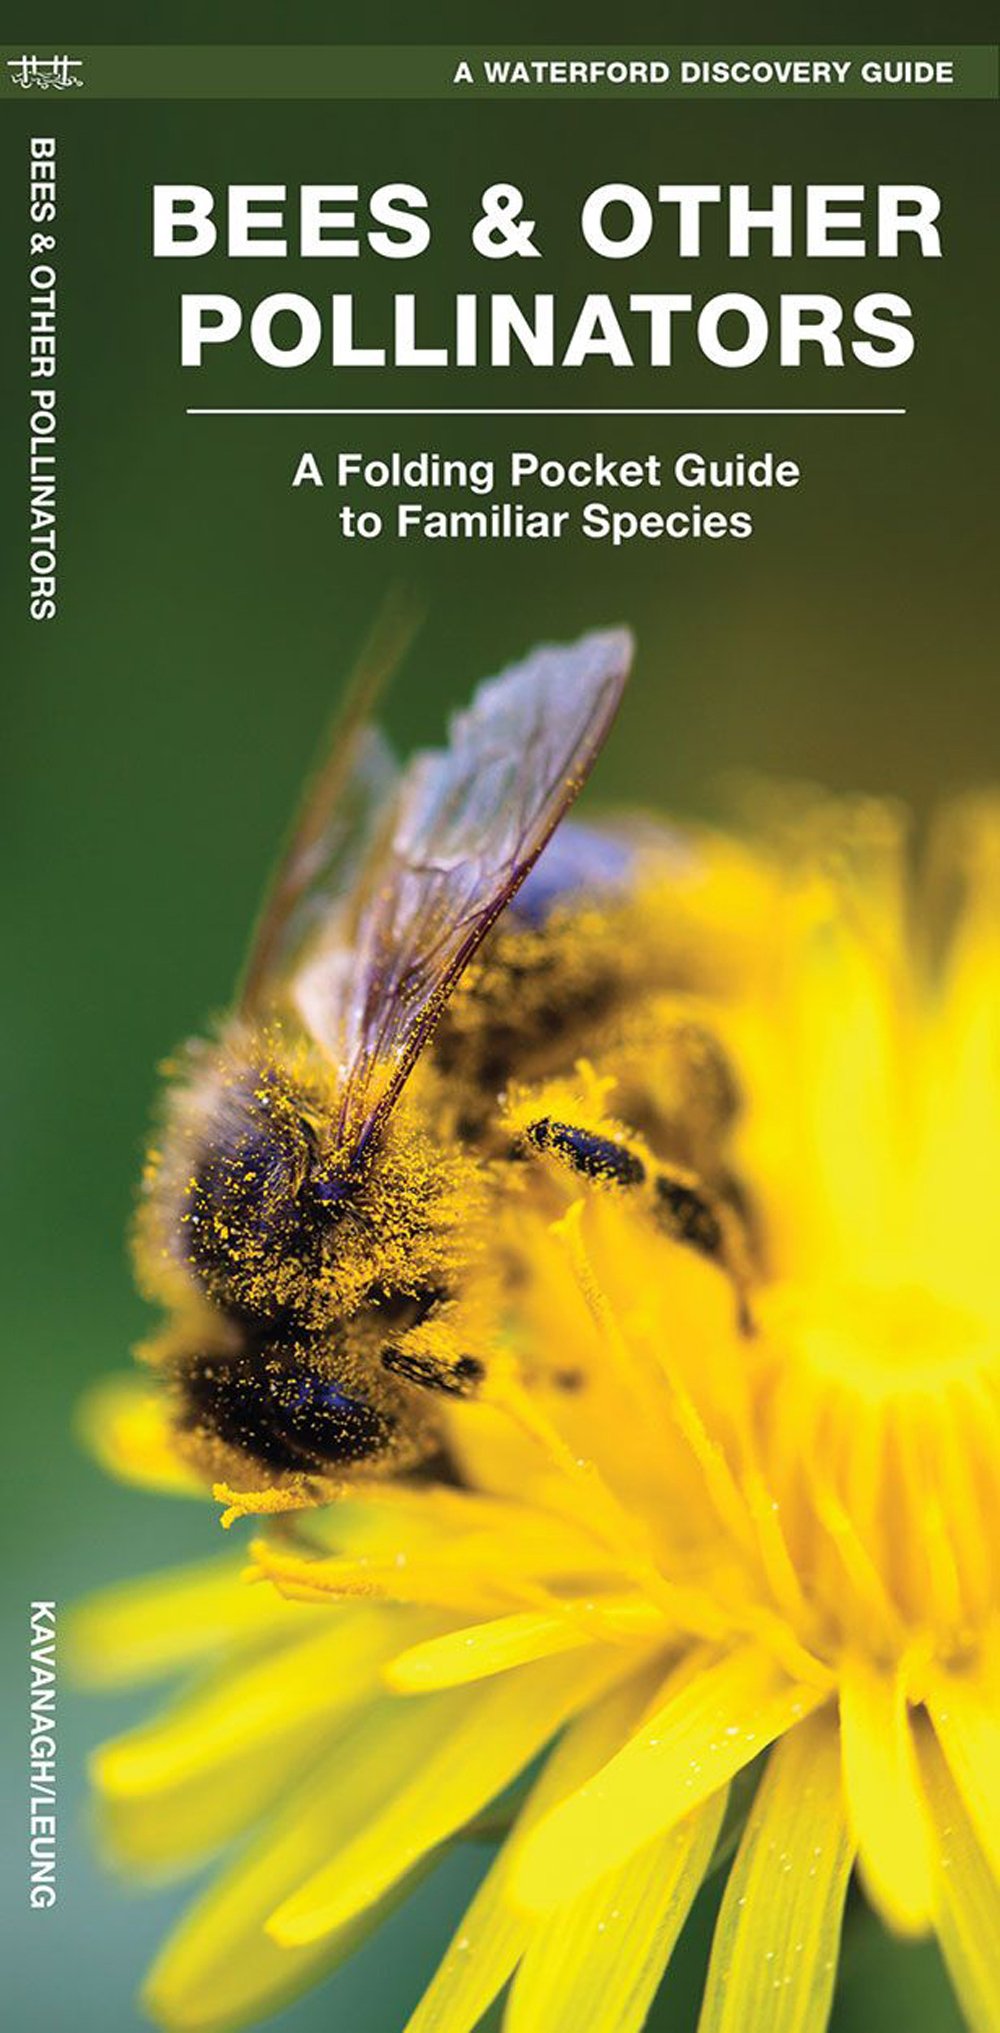 Bees & Other Pollinators (Waterford Discovery® Guide)